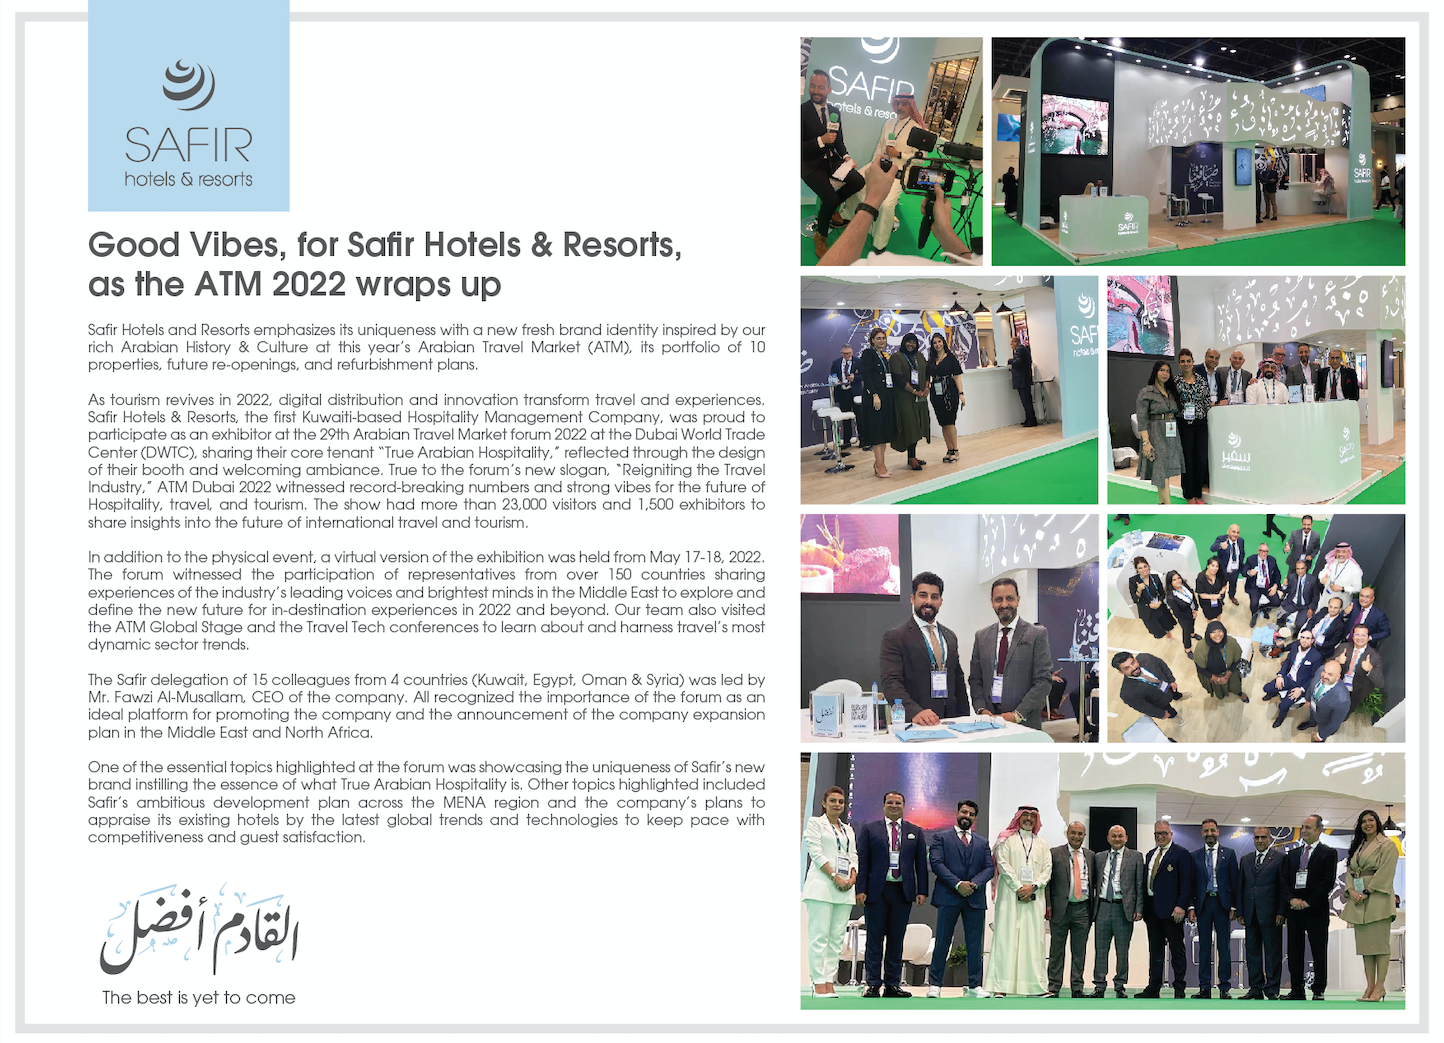 Good Vibes, for Safir Hotels & Resorts, as the ATM 2022 wraps up.